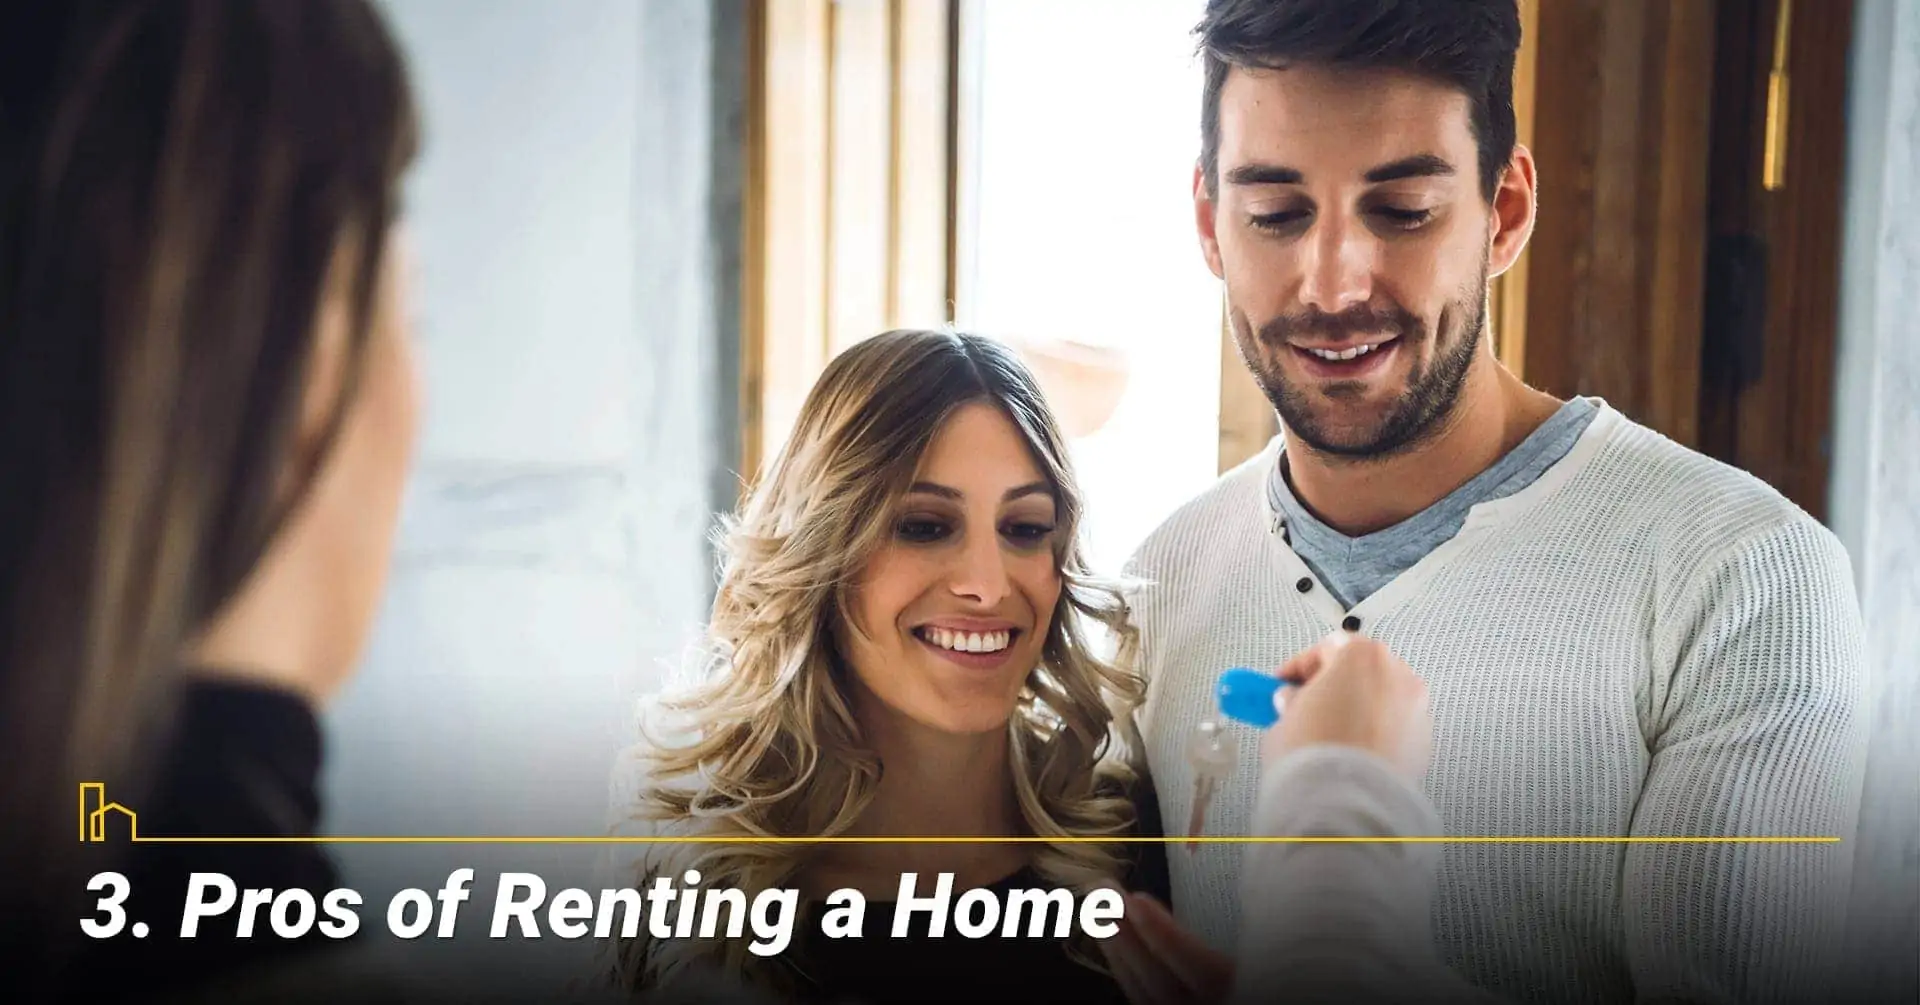 Pros of Renting a Home, advantages of rent out your home